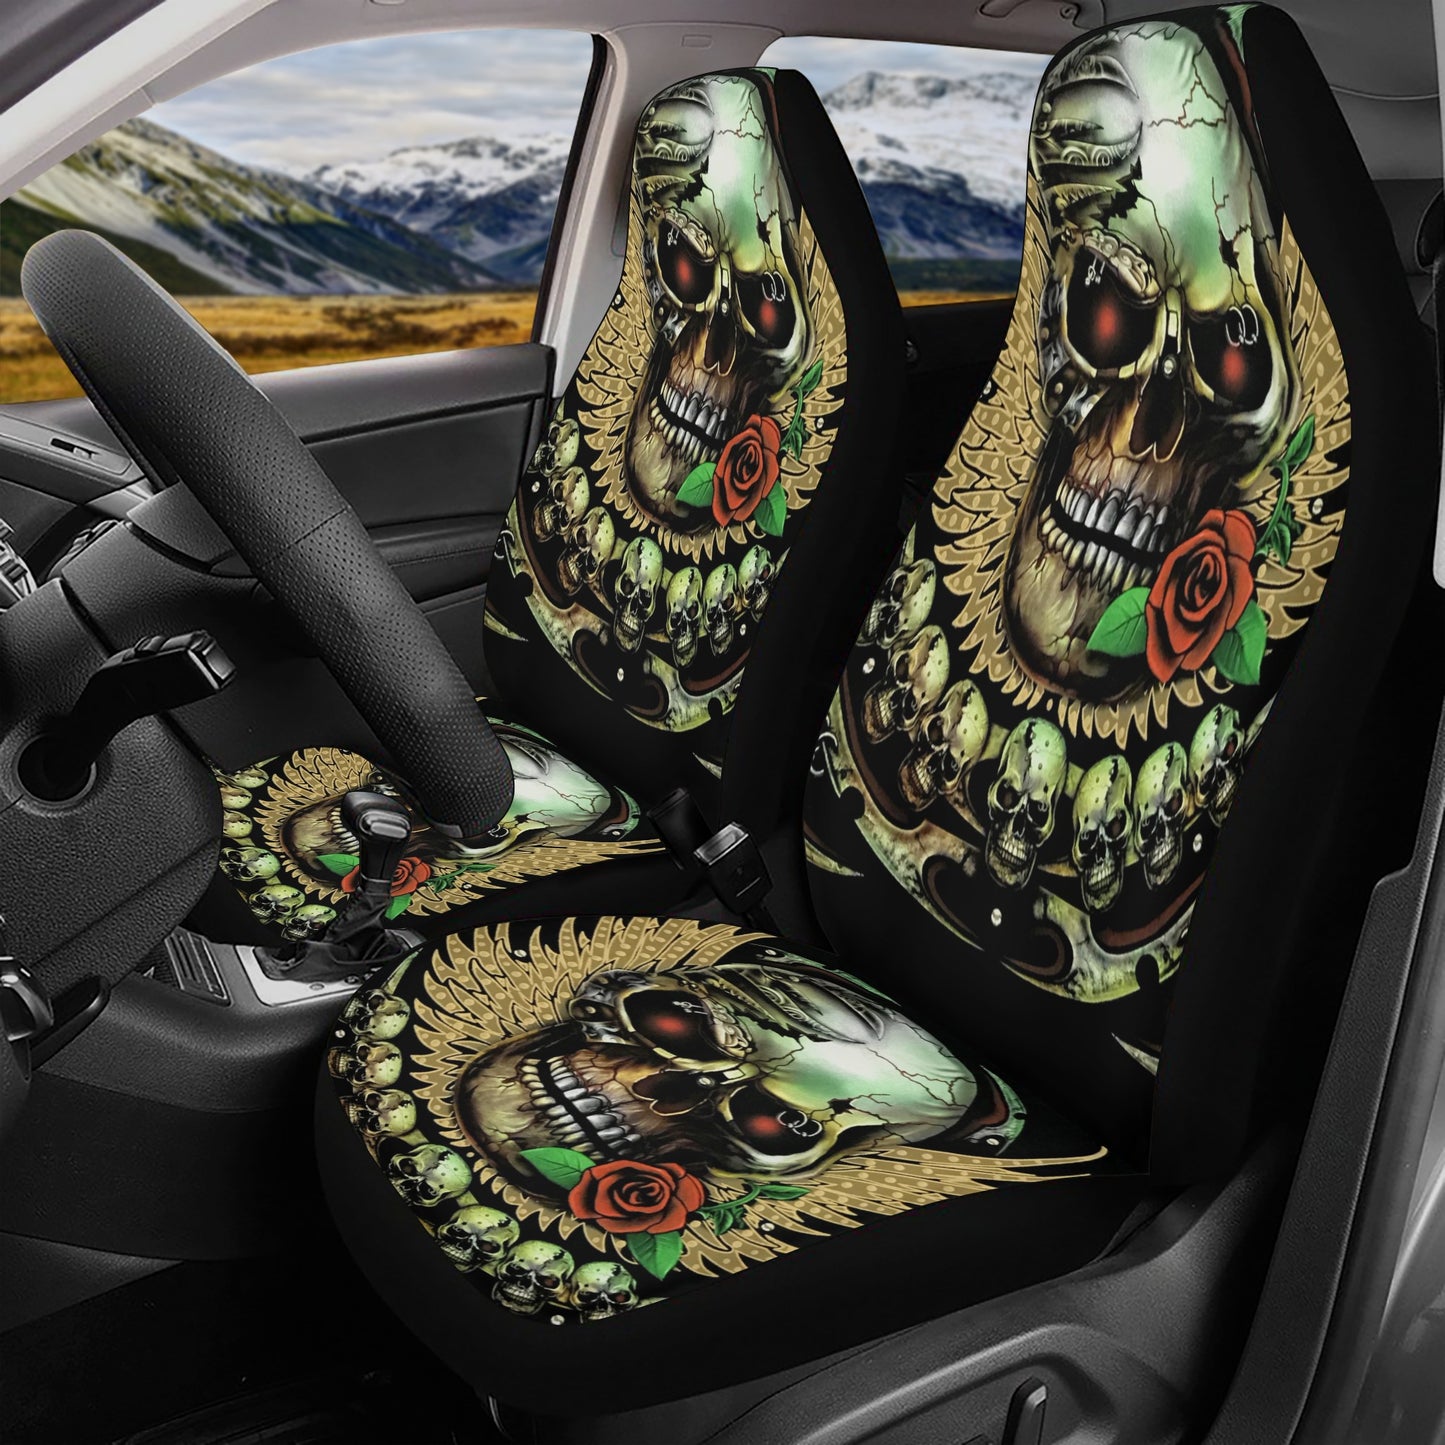 Candy skull seat cover for car, sugar skull girl car seat tool, floral skull seat cover protector, sugar skull car seat tool, day of the dea